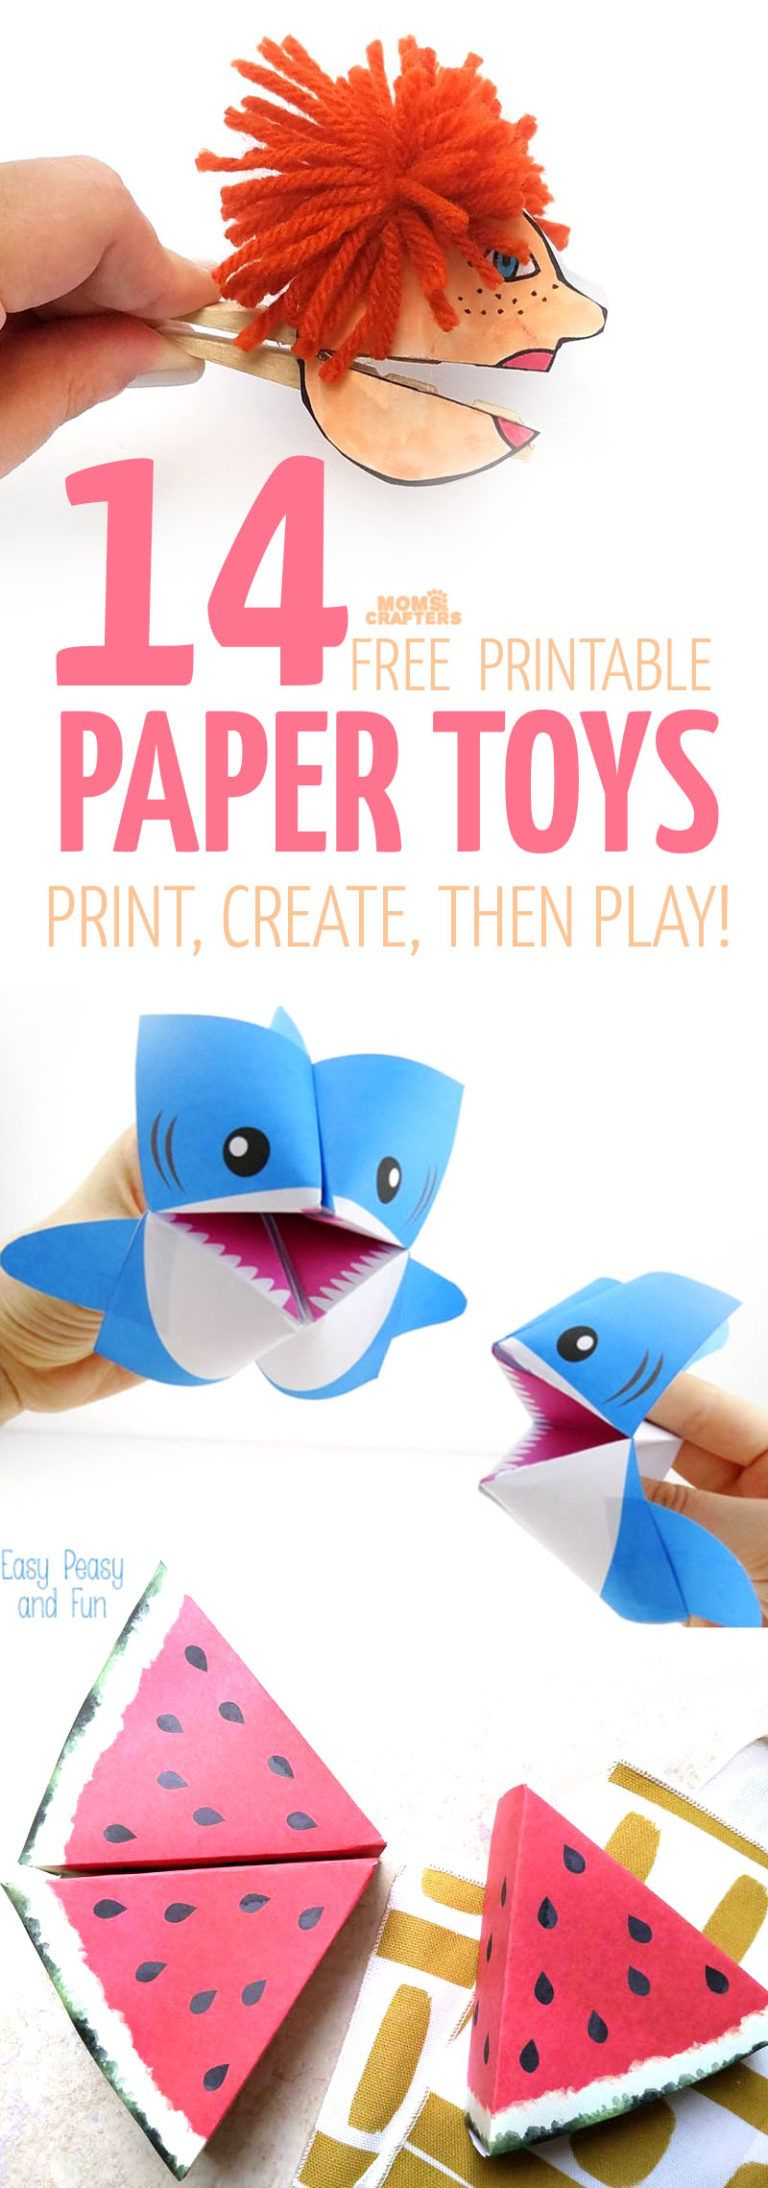 Paper Toy Templates - 14 Free Printables To Craft And Play! | Papier - Free Printable Paper Crafts